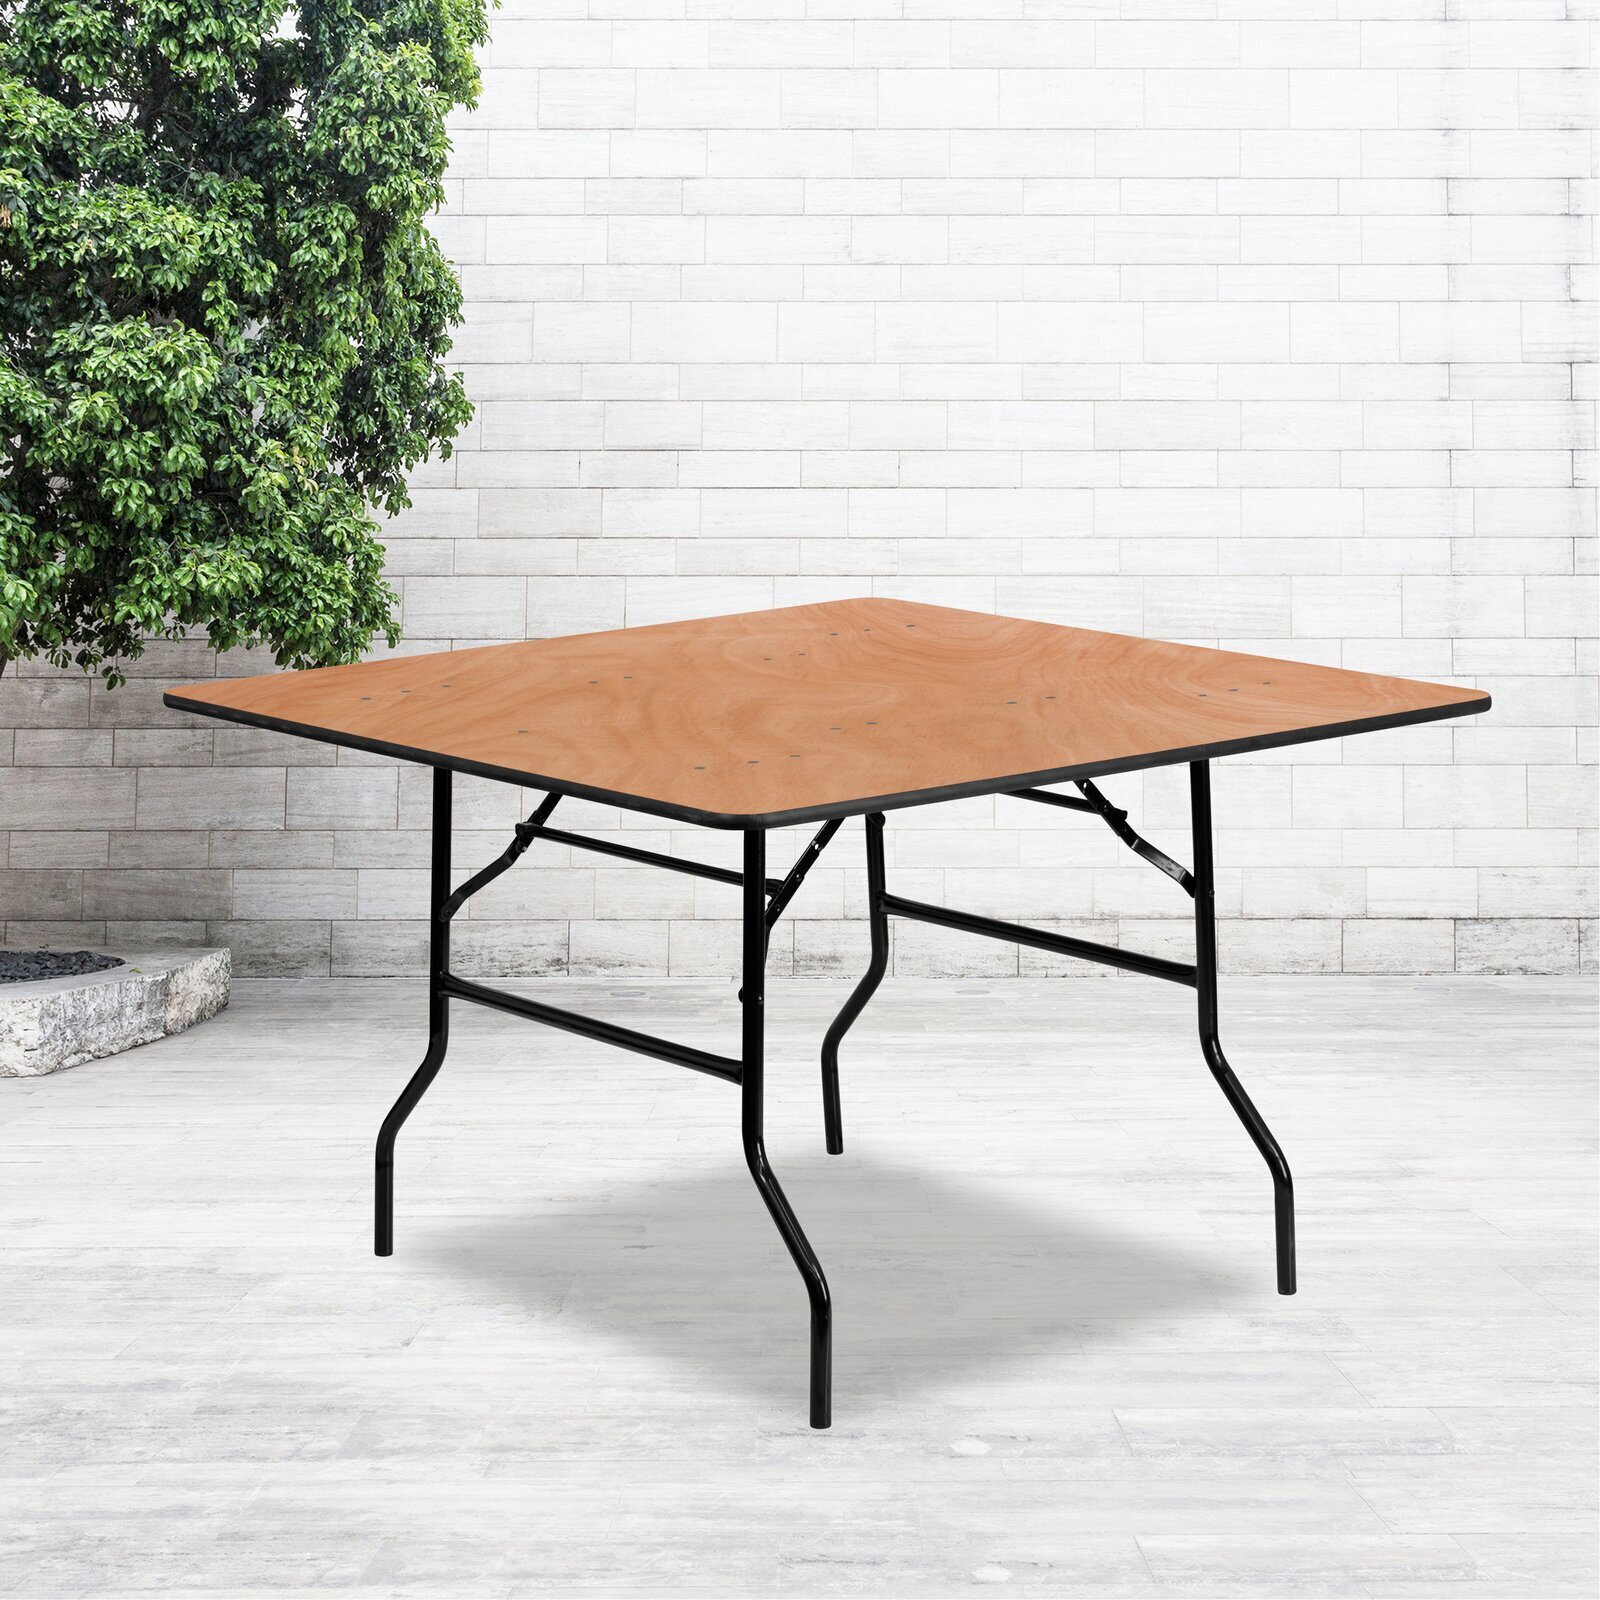 Functional Square Folding Table